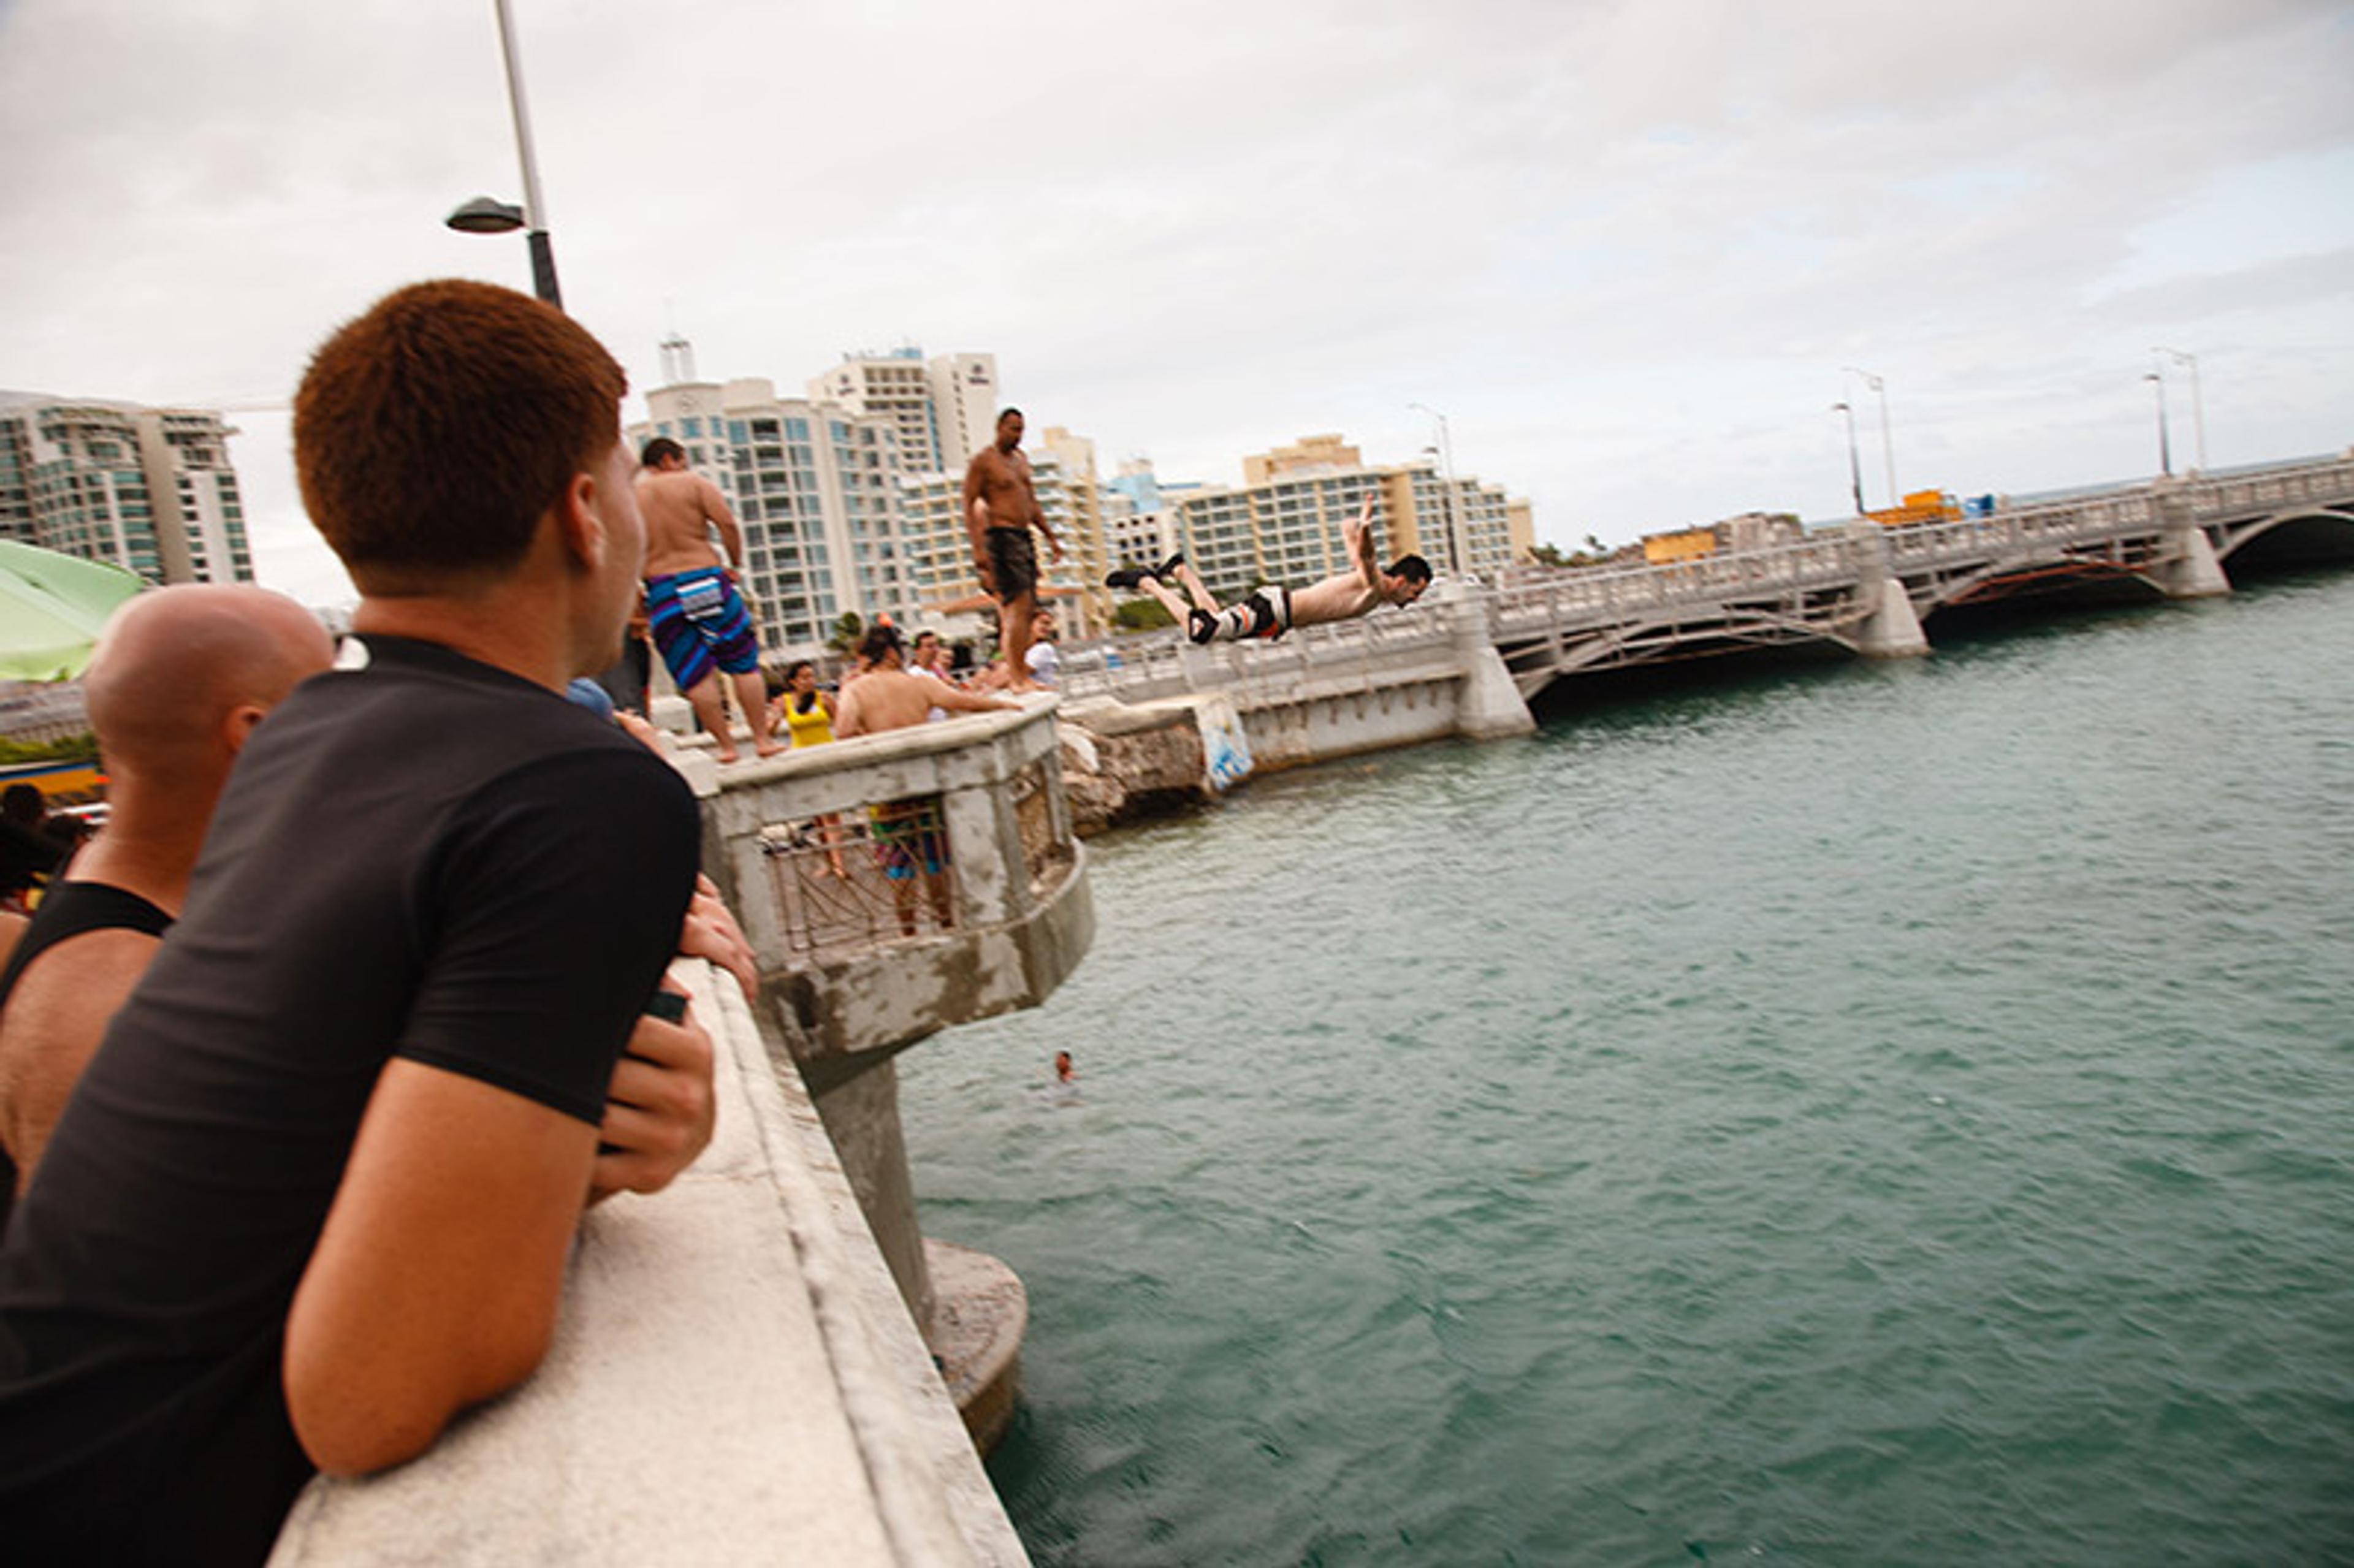 Spectators watch people diving off an ancient bridge into a harbour. In the background are modern apartment buildings